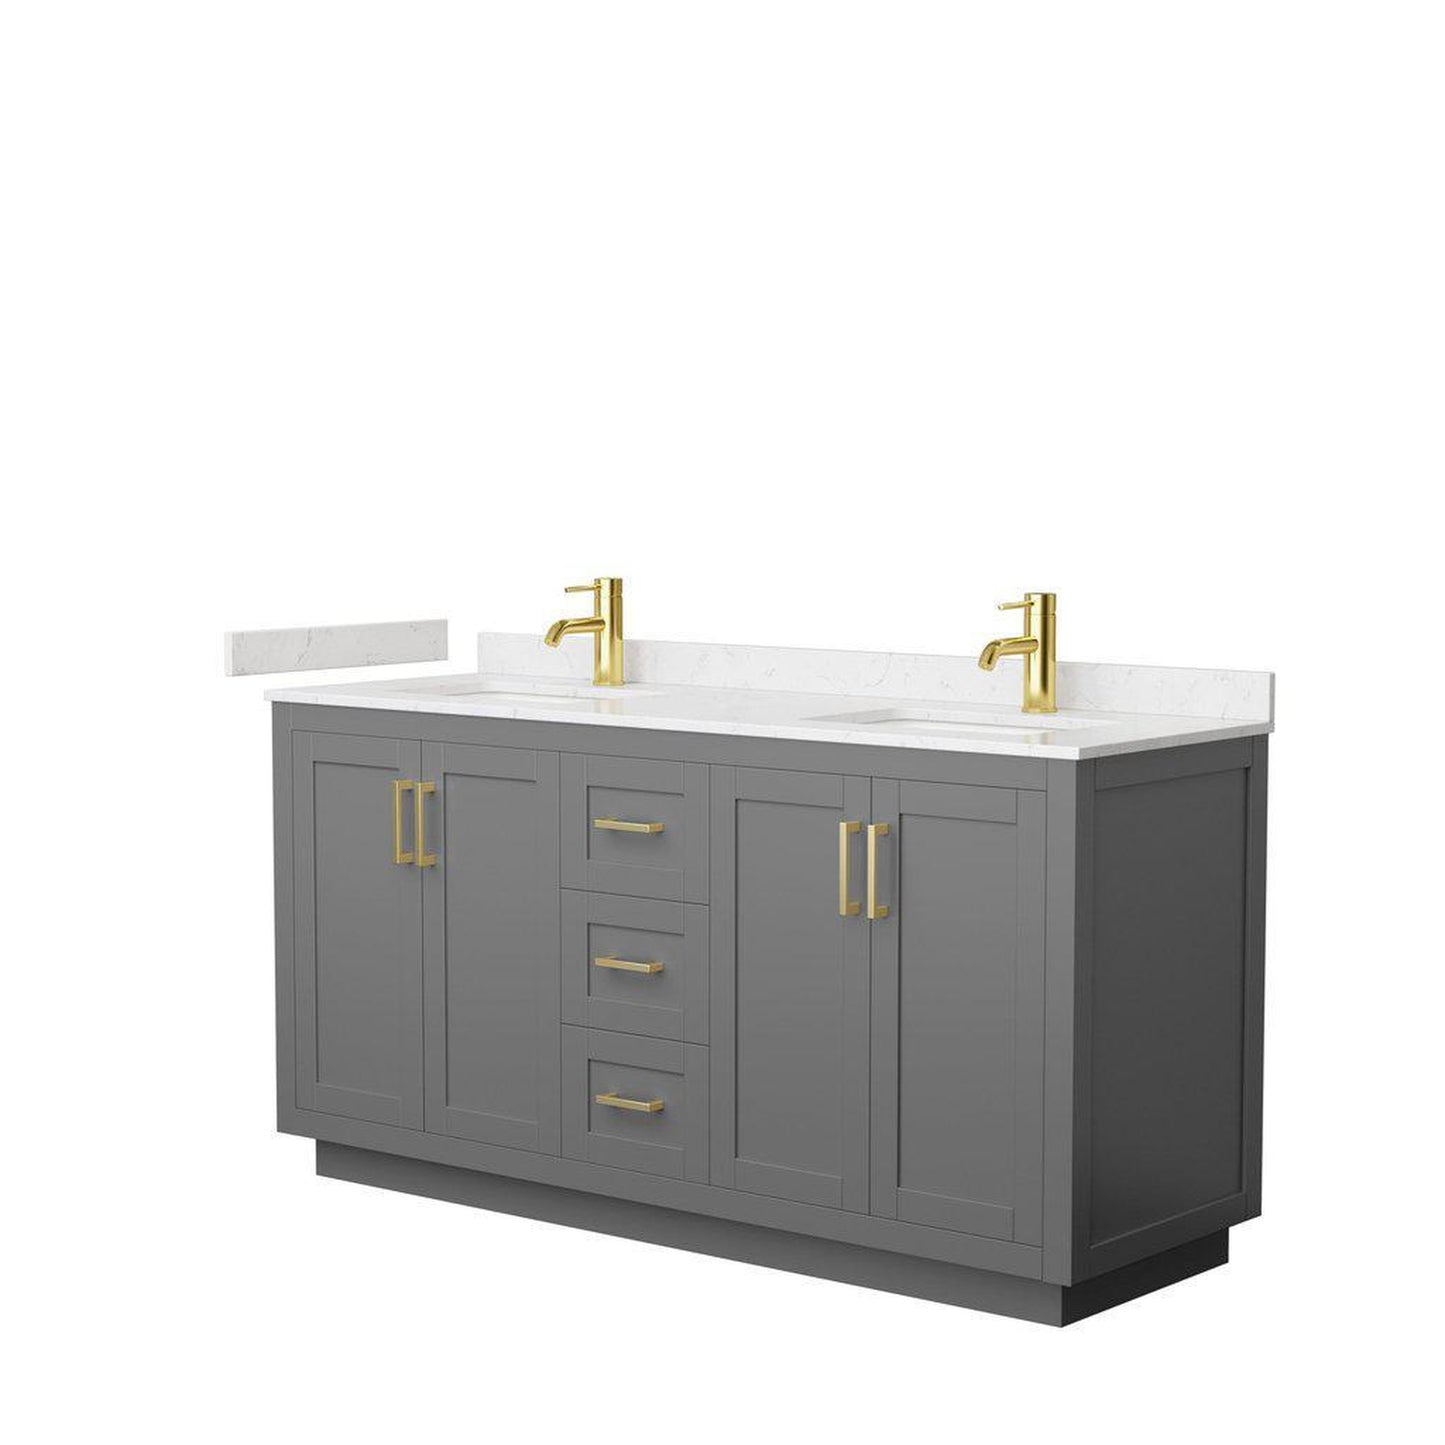 Wyndham Collection Miranda 66" Double Bathroom Dark Gray Vanity Set With Light-Vein Carrara Cultured Marble Countertop, Undermount Square Sink, And Brushed Gold Trim